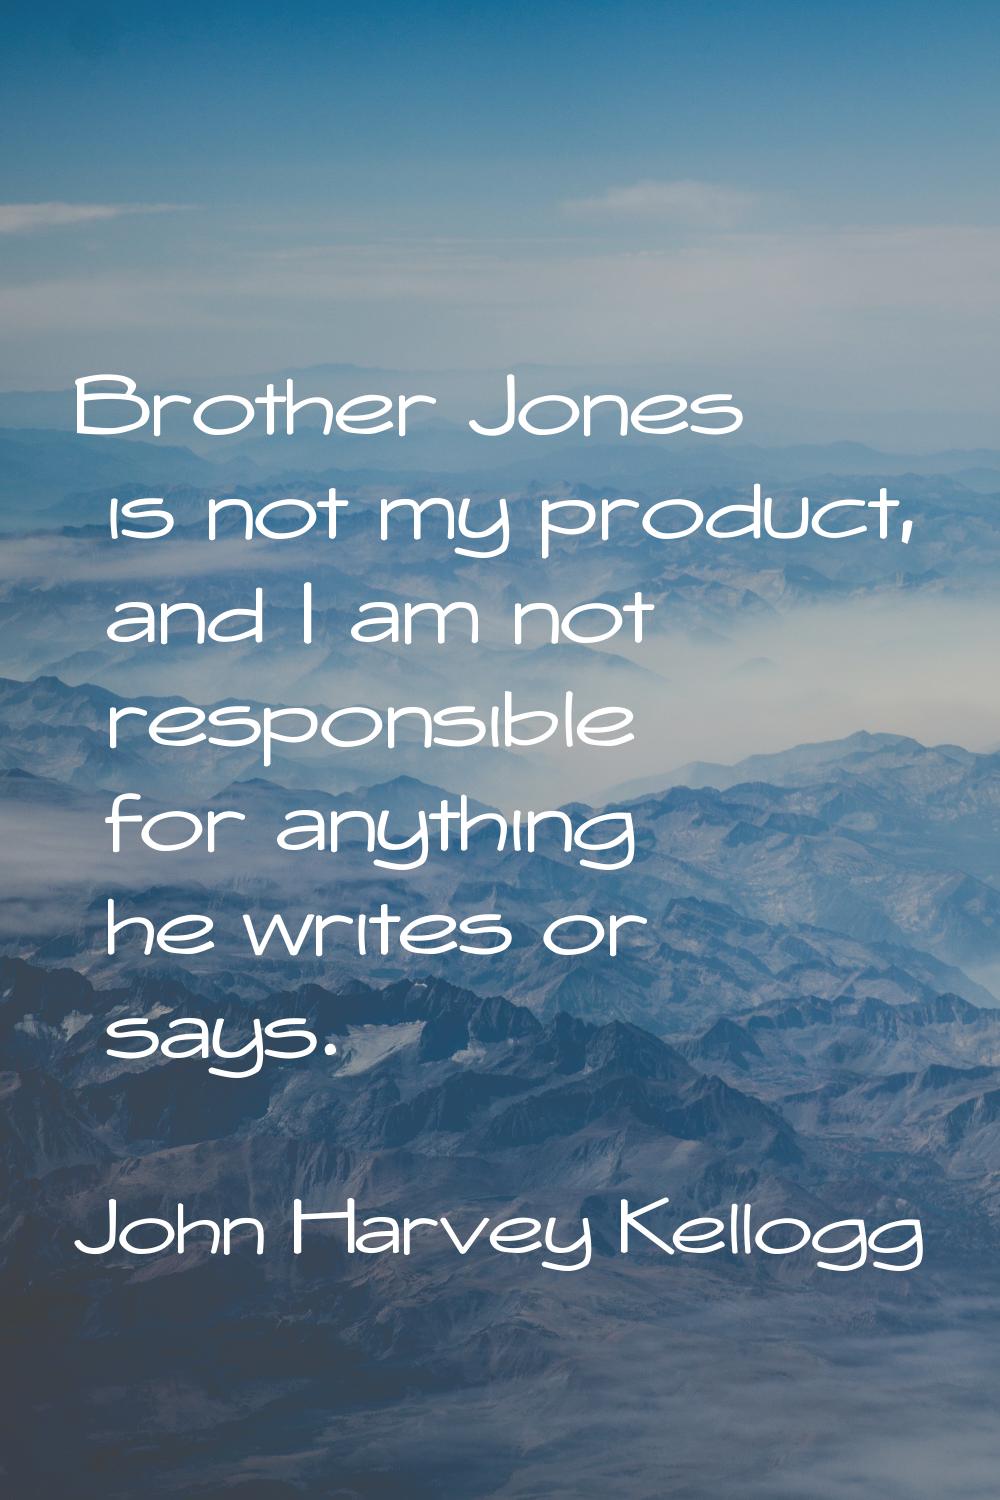 Brother Jones is not my product, and I am not responsible for anything he writes or says.